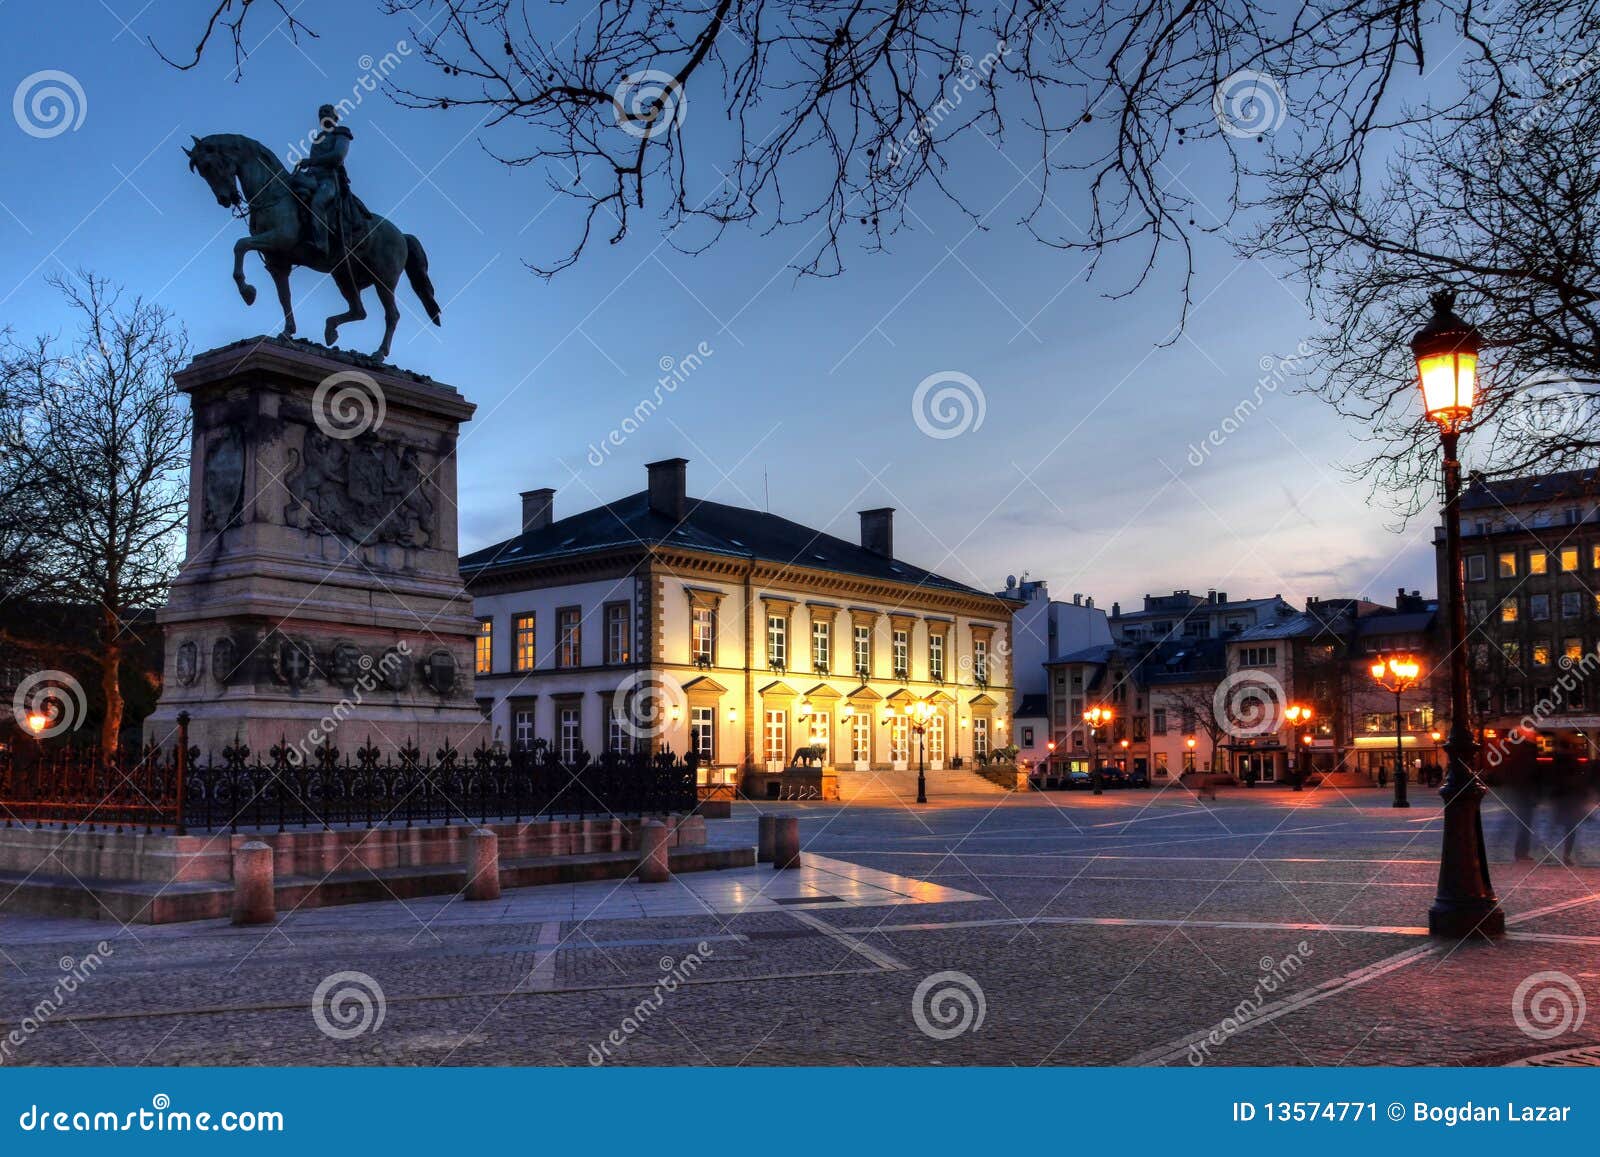 place guillaume ii, luxembourg city